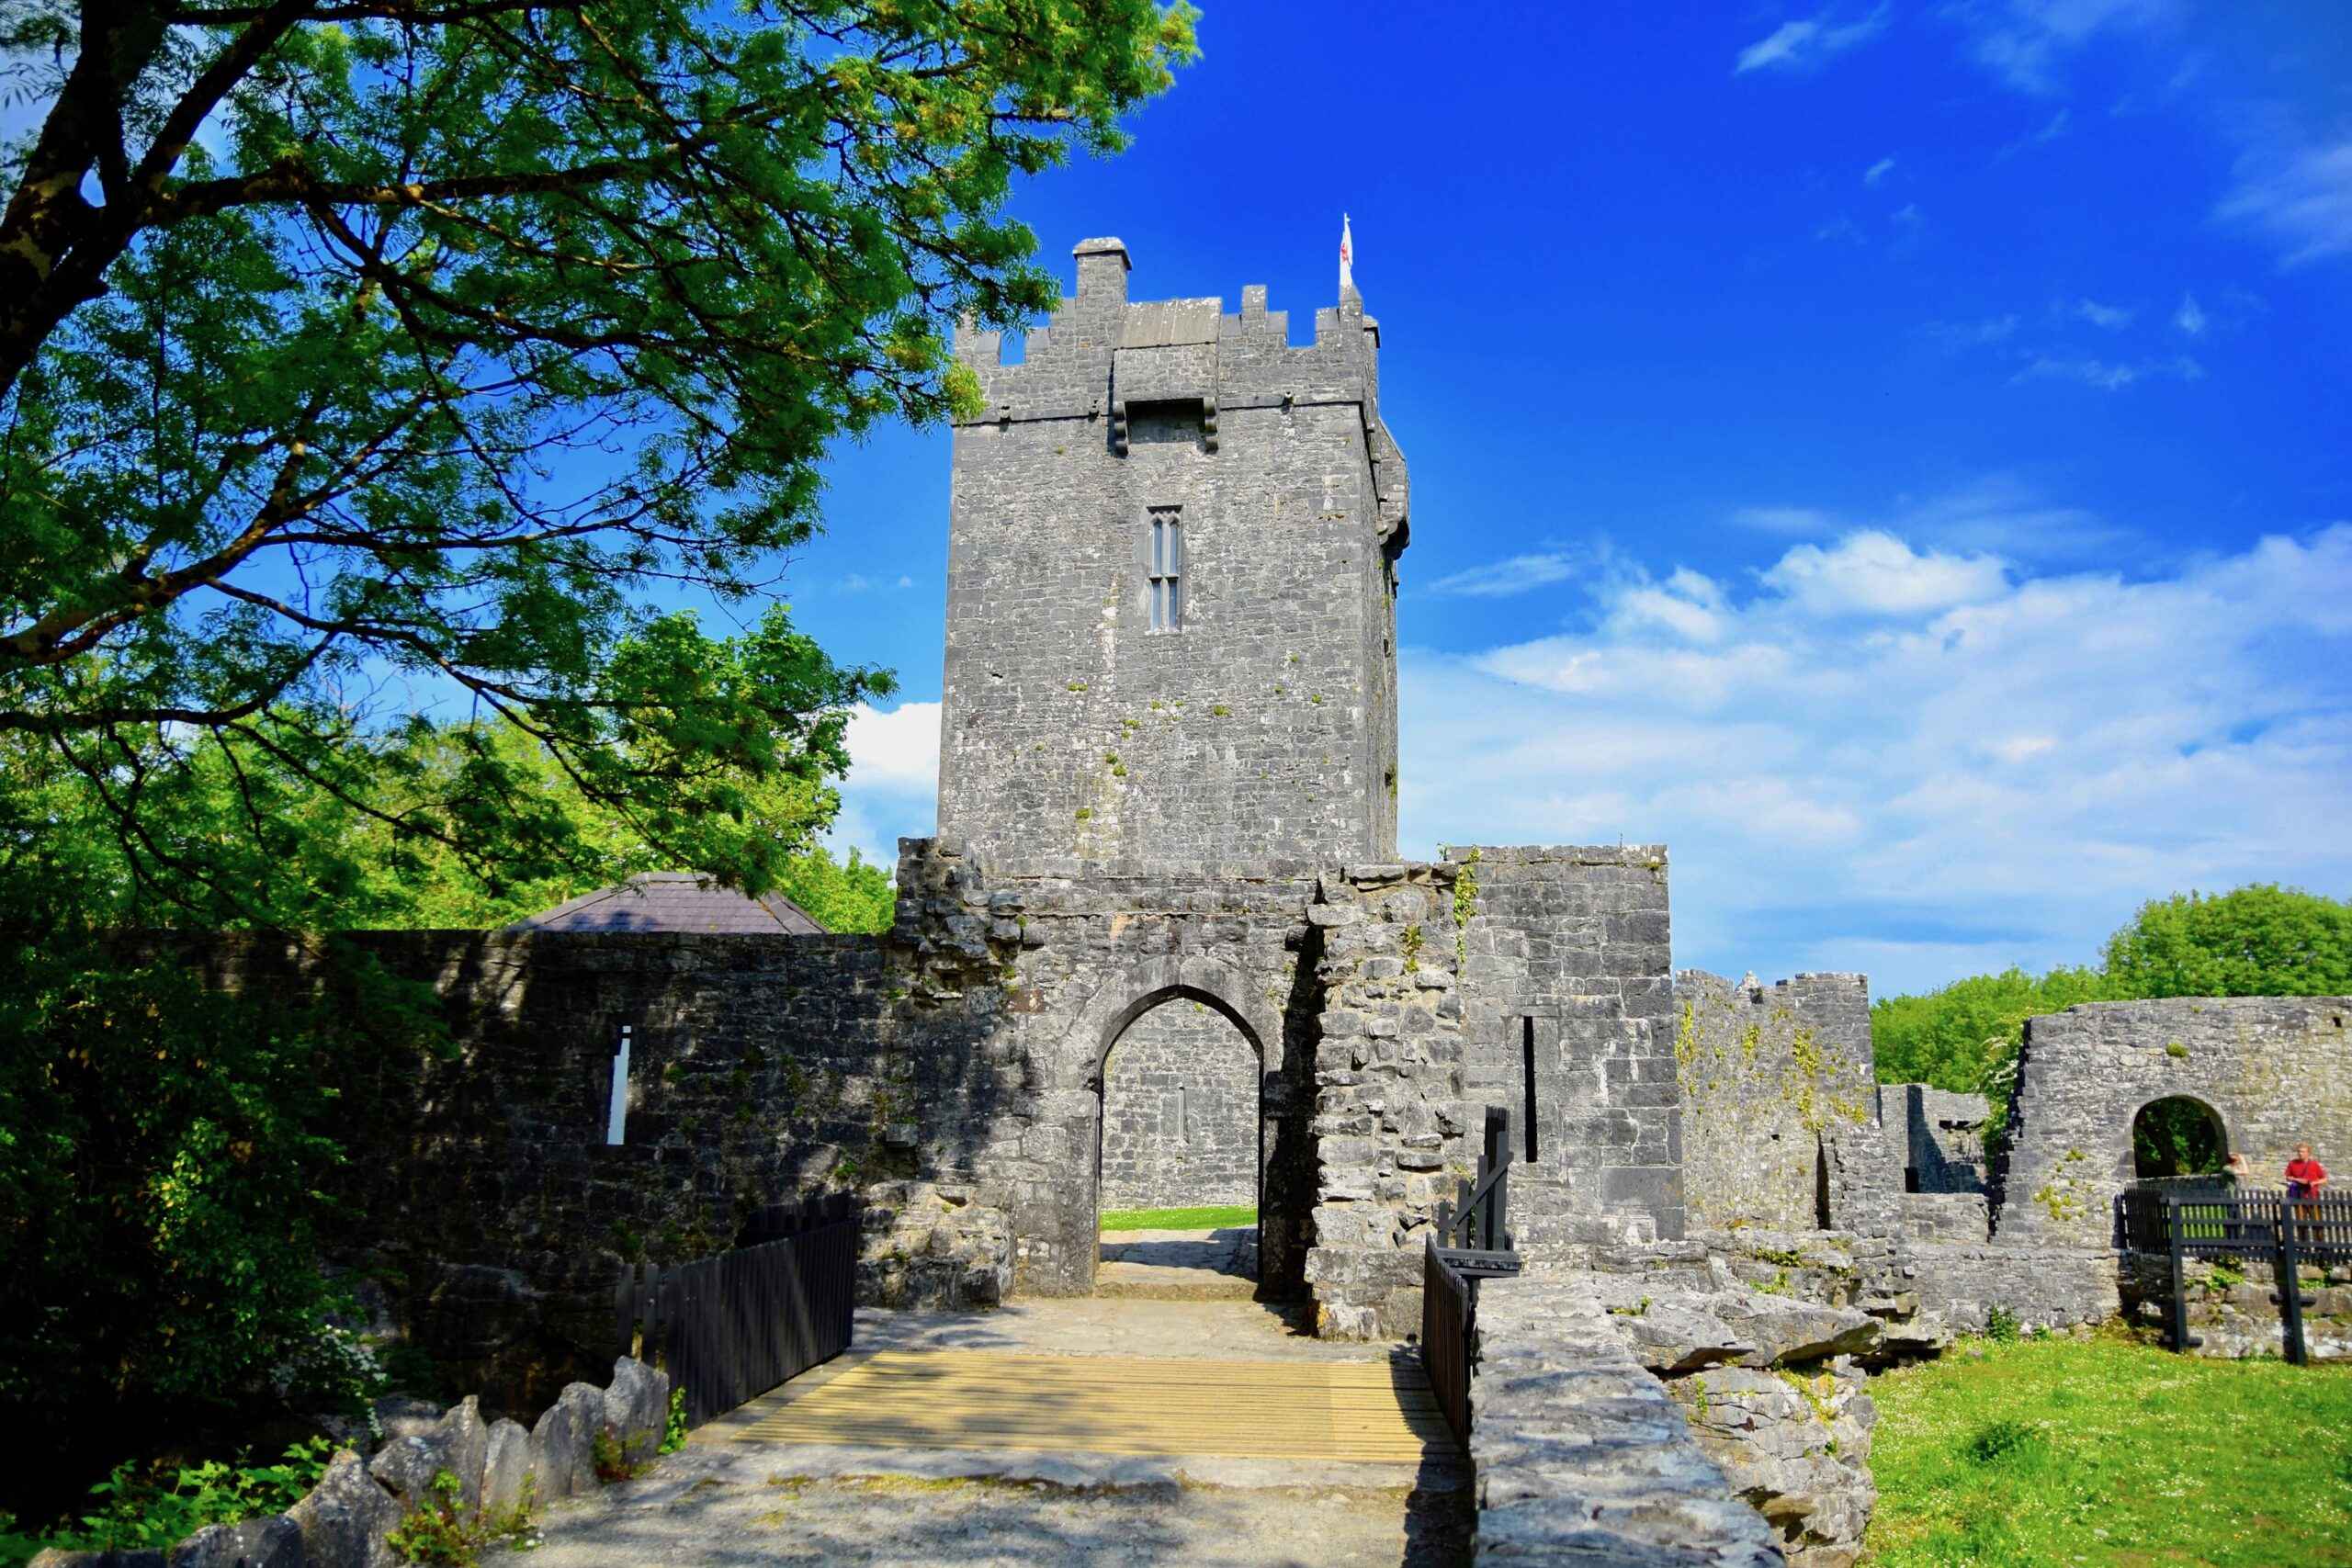 “Aughnanure Castle” Oughterard, Co. Galway